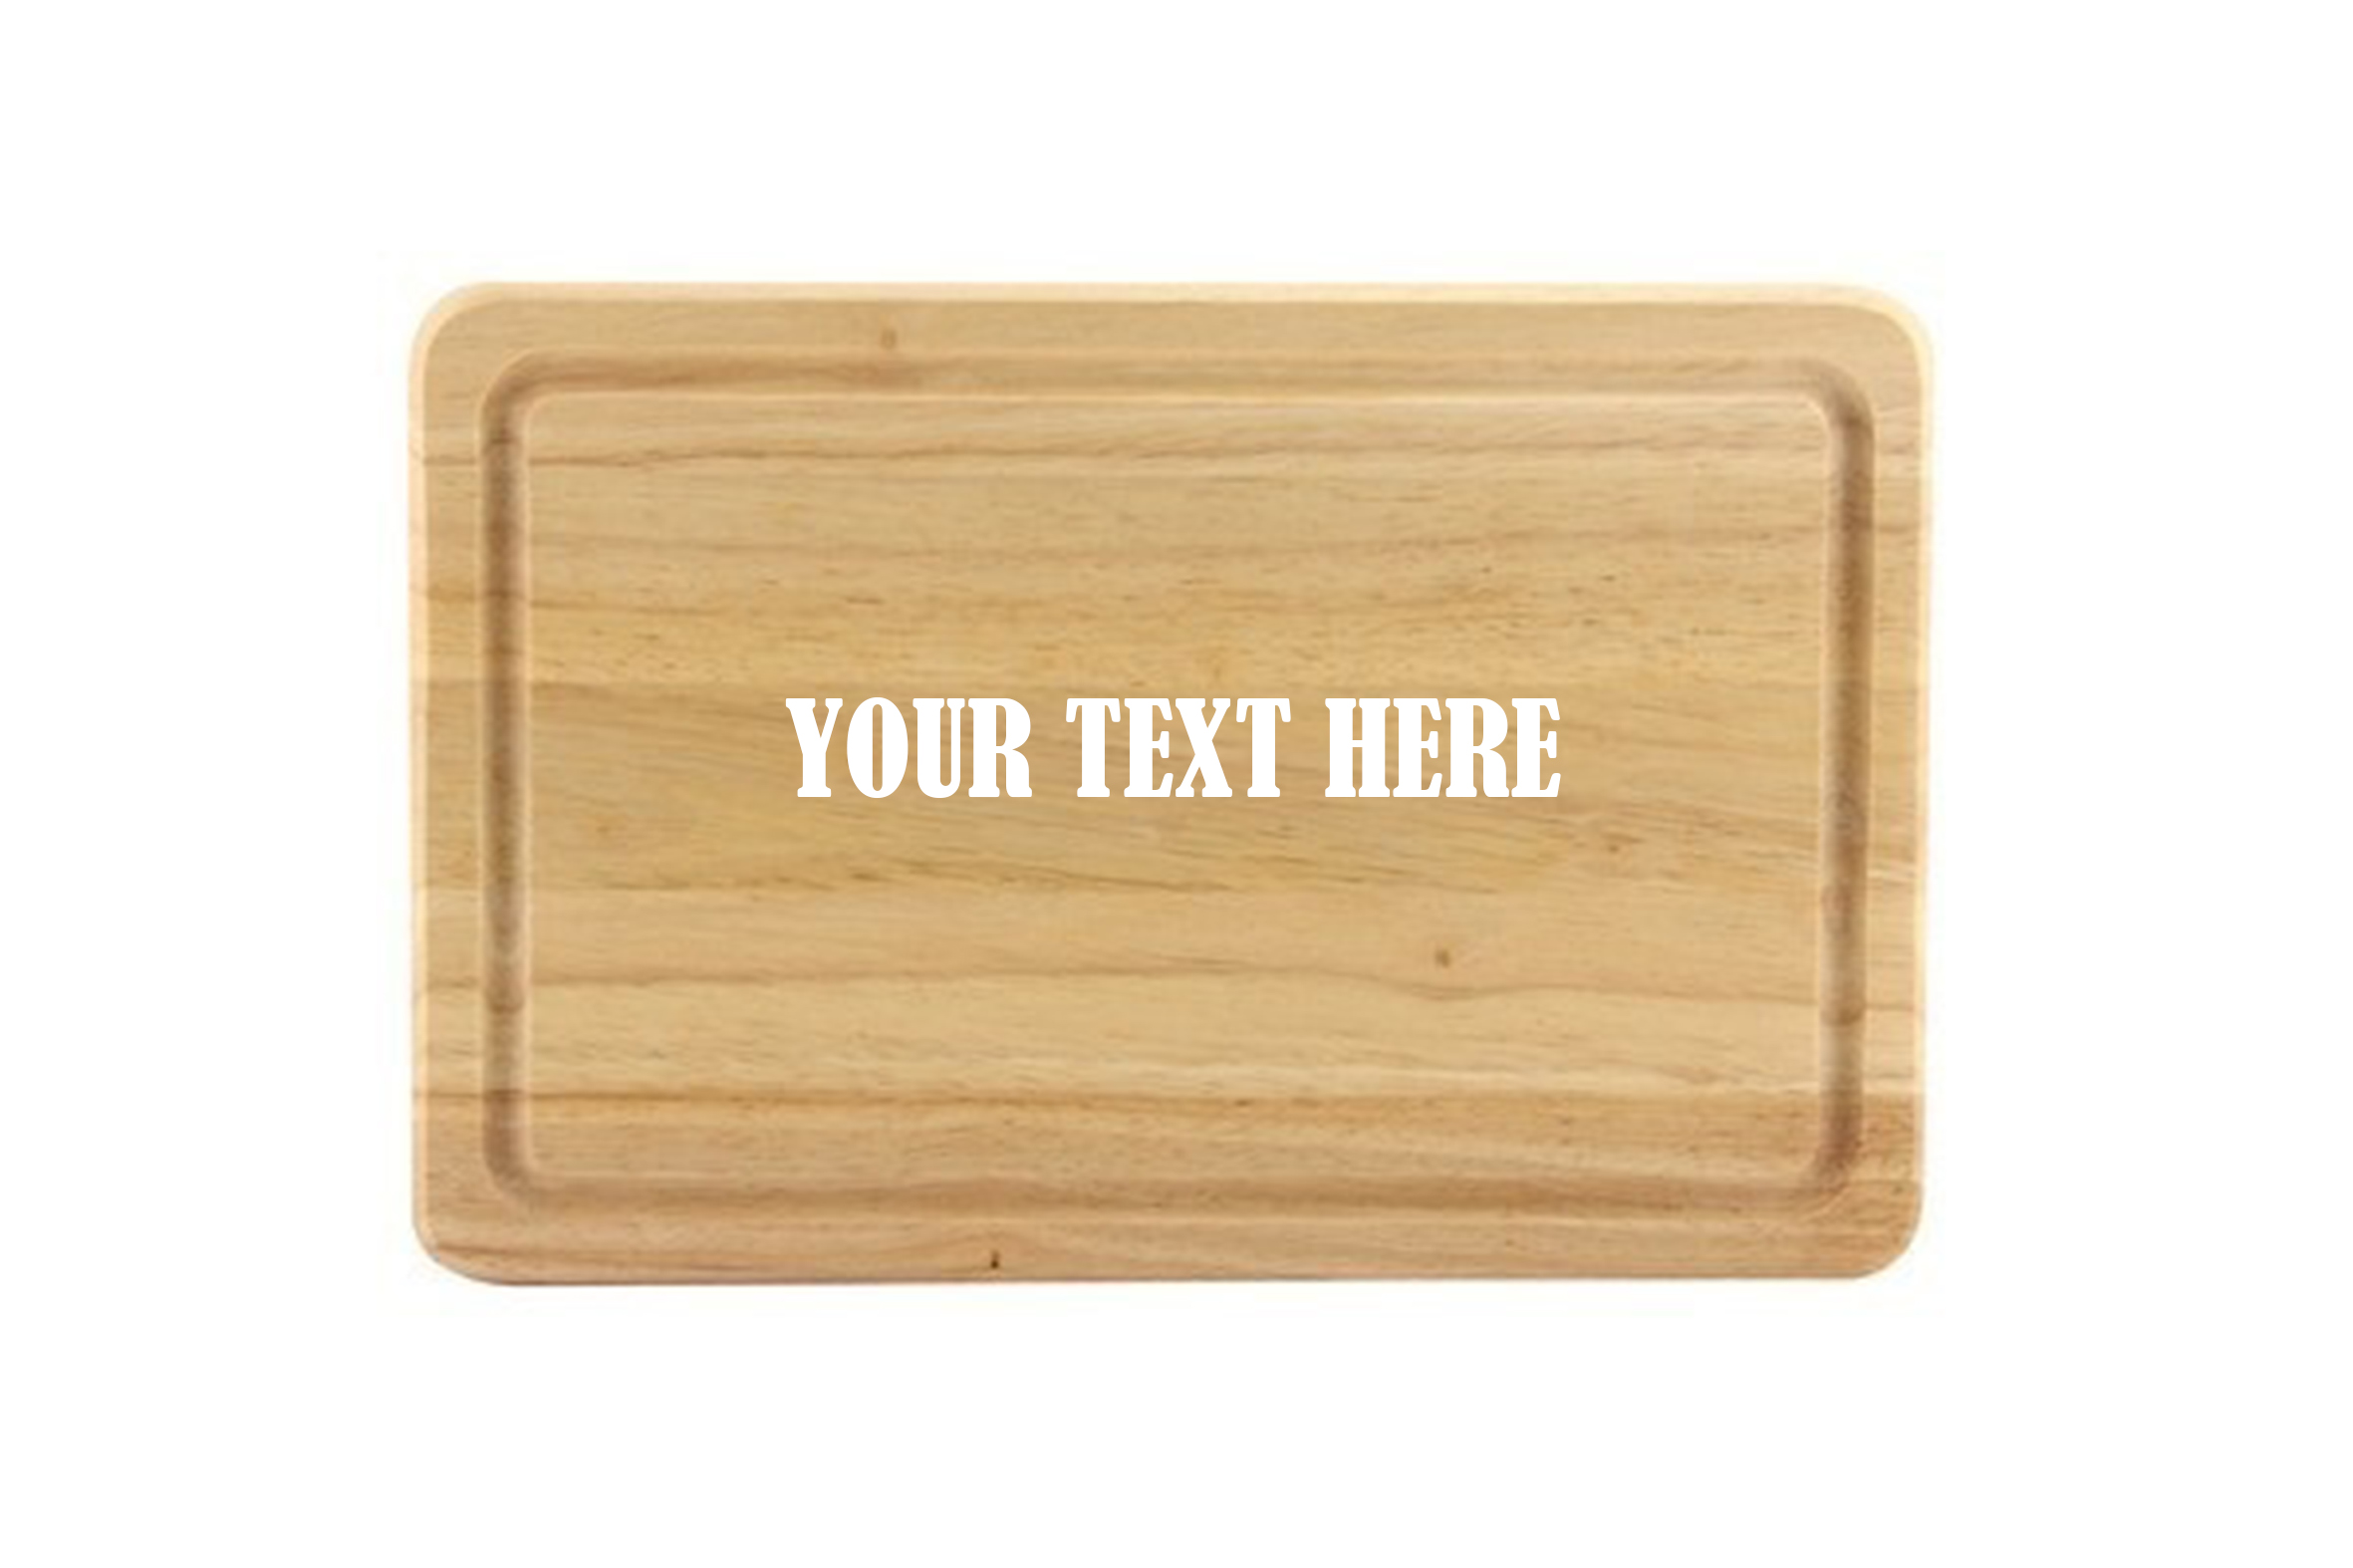 Personalised wooden chopping board. Personalised engraved beer glass. Beautiful engraved personalised gift for every occasion. Personalised gifts for daddy. This image is shown on the personalisation company website. Personalised and affordable gifts for every occassion. Visit www.the-personalisation-company.co.uk